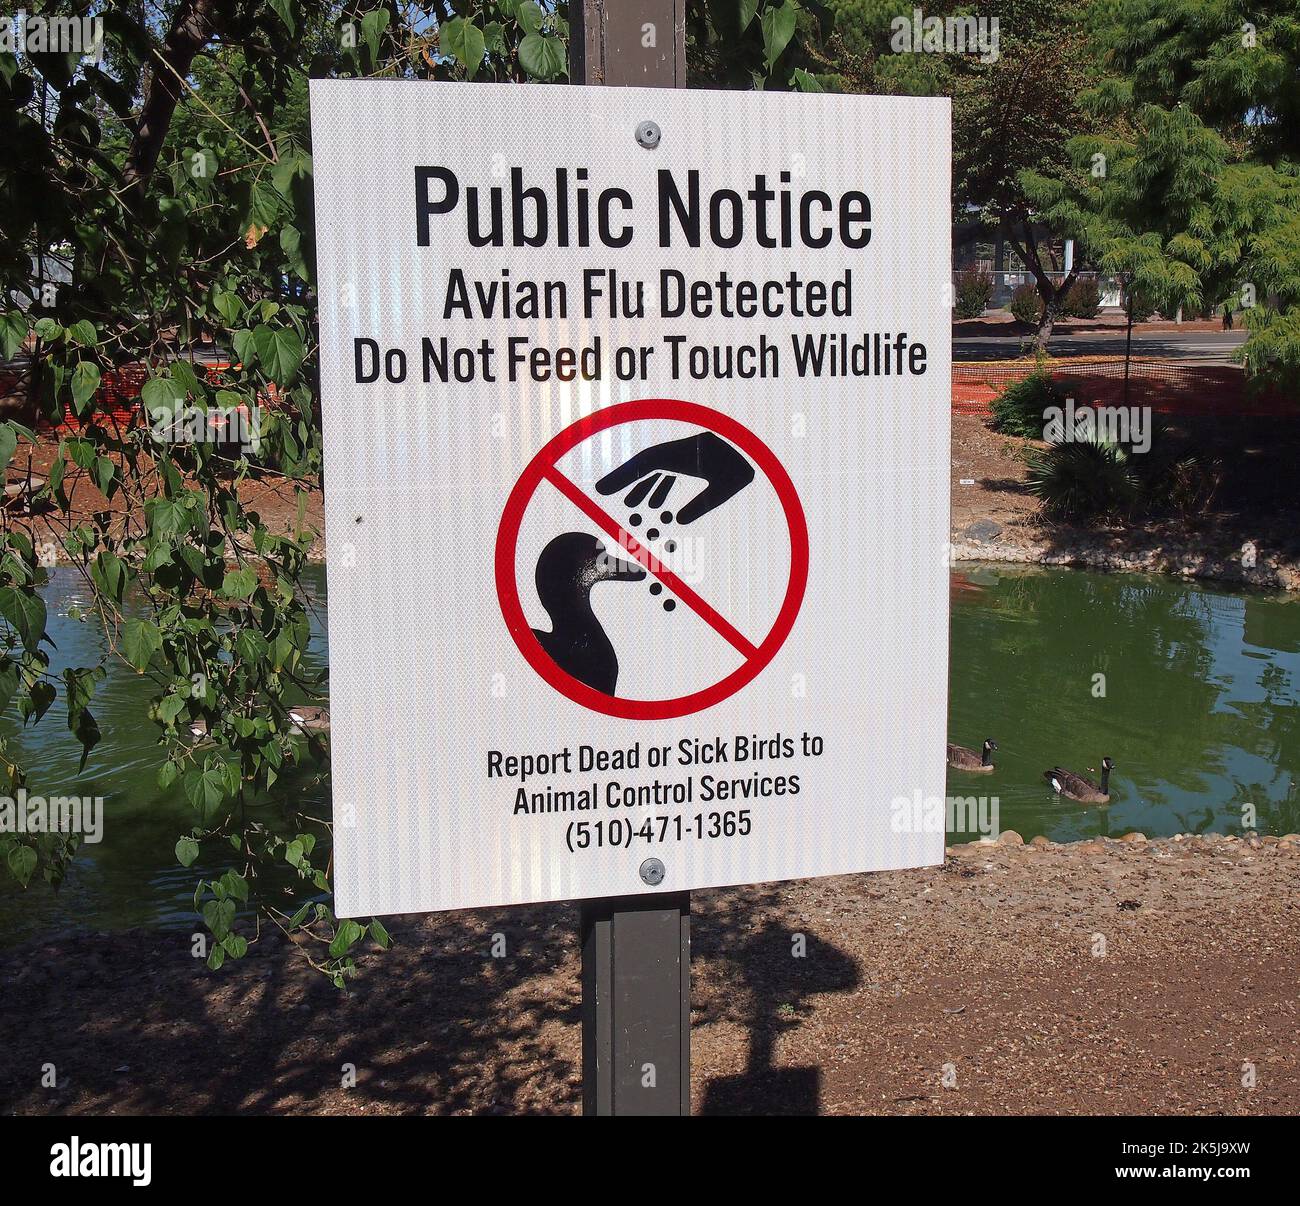 park pond with waterfowl fenced off in Union City, California and Avian Flu detected do not feed or touch wildlife public notice sign, report dead or sick birds to Animal Control Services Stock Photo